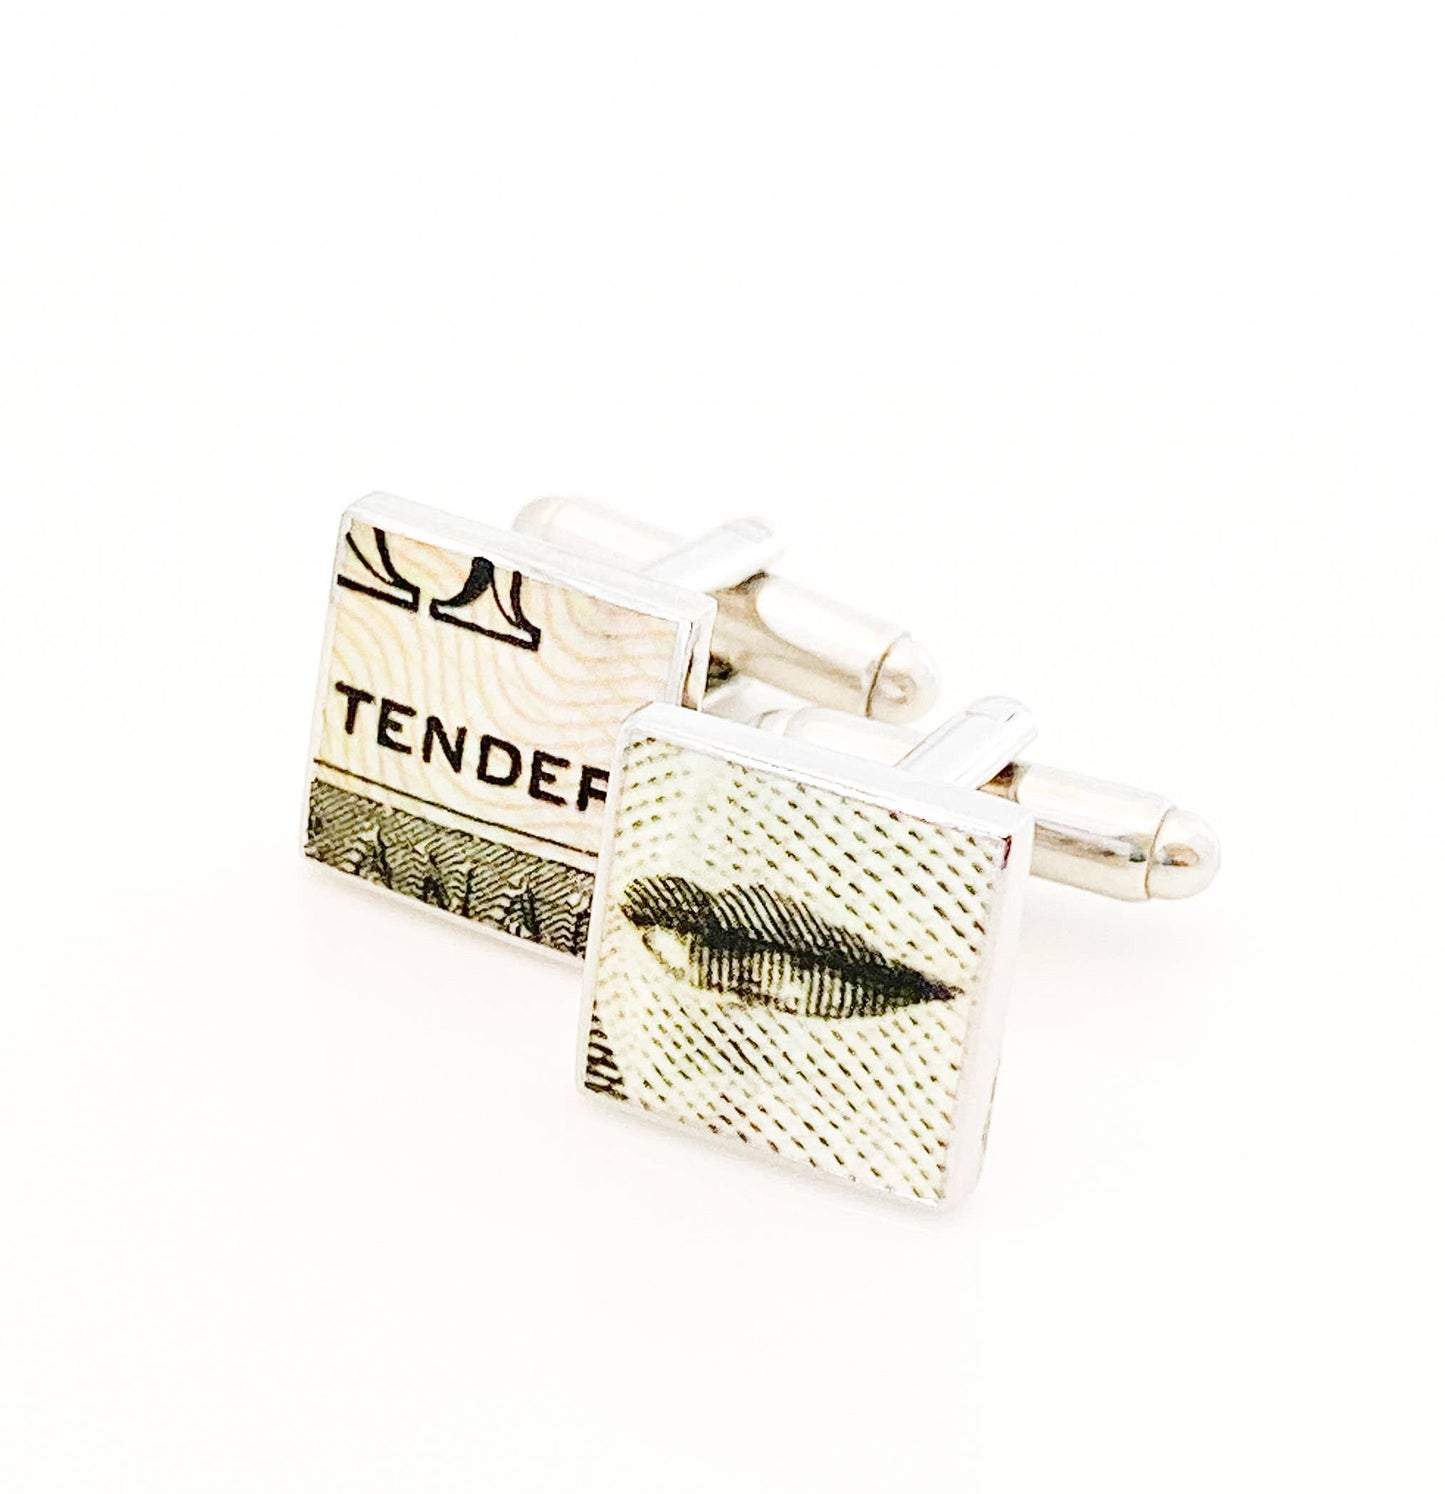 Square cufflinks with Tender and HRH's lips from Canadian dollar bill